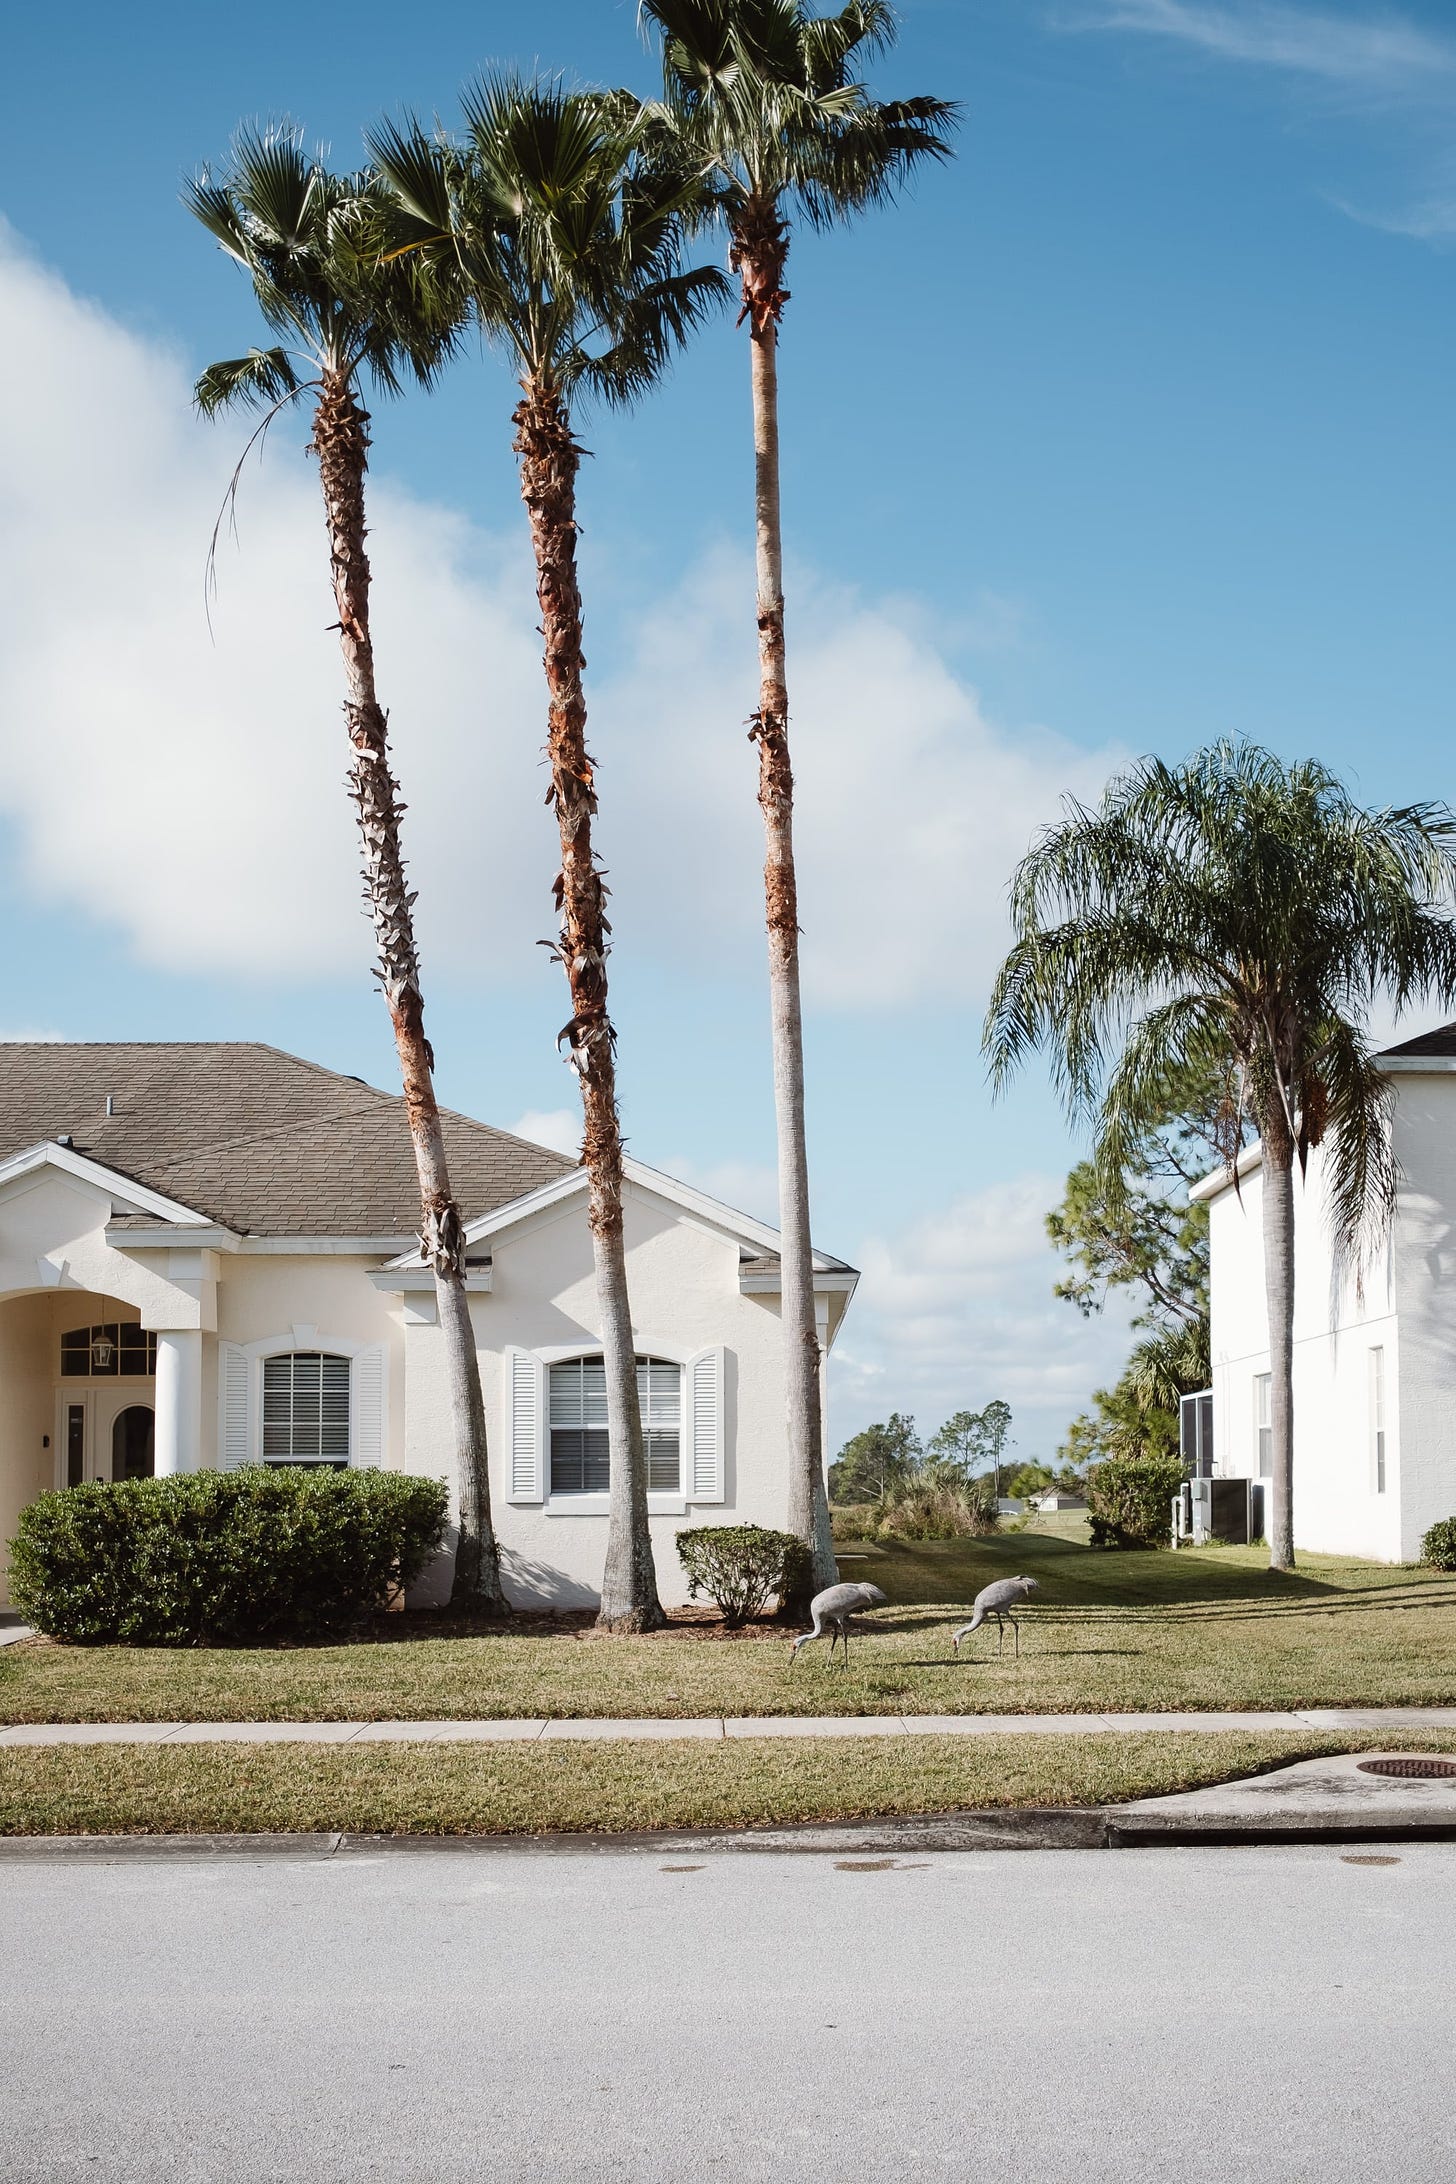 A streetscape of a house, palm tress and a pair of Sandhill Cranes on the lawn.